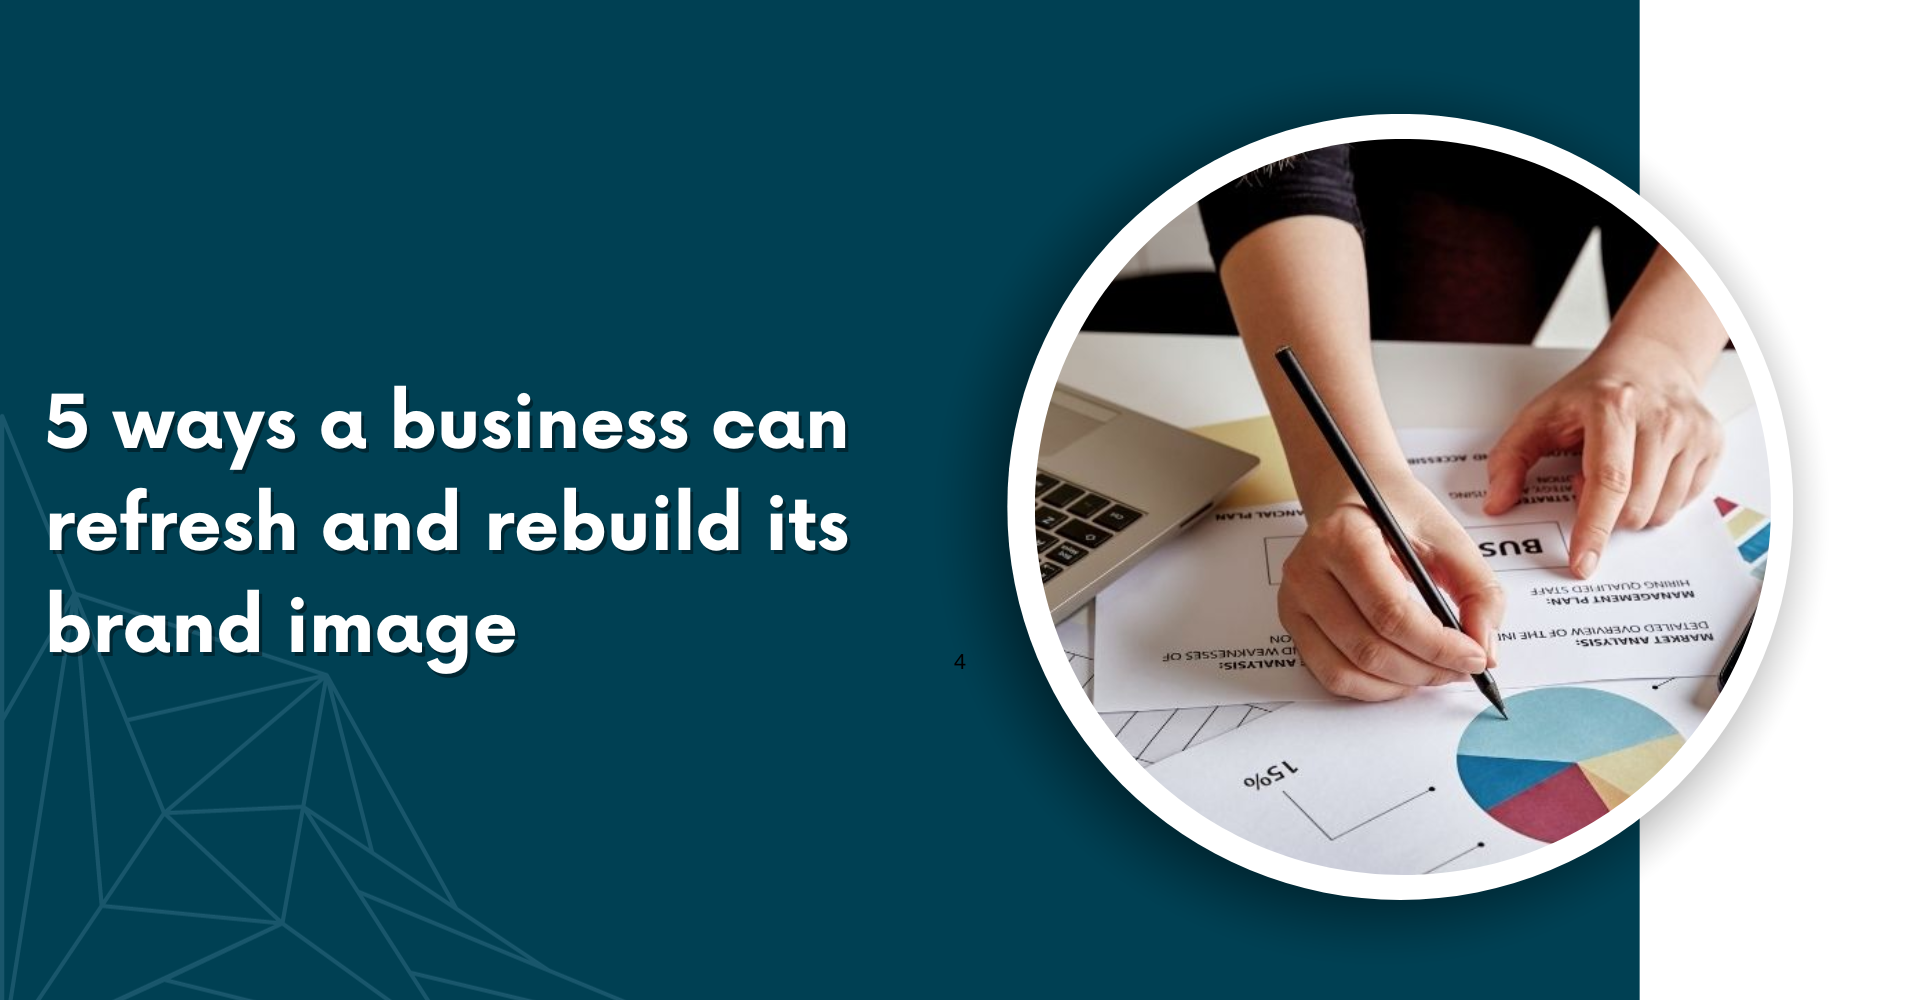 5 ways a business can refresh and rebuild its brand image